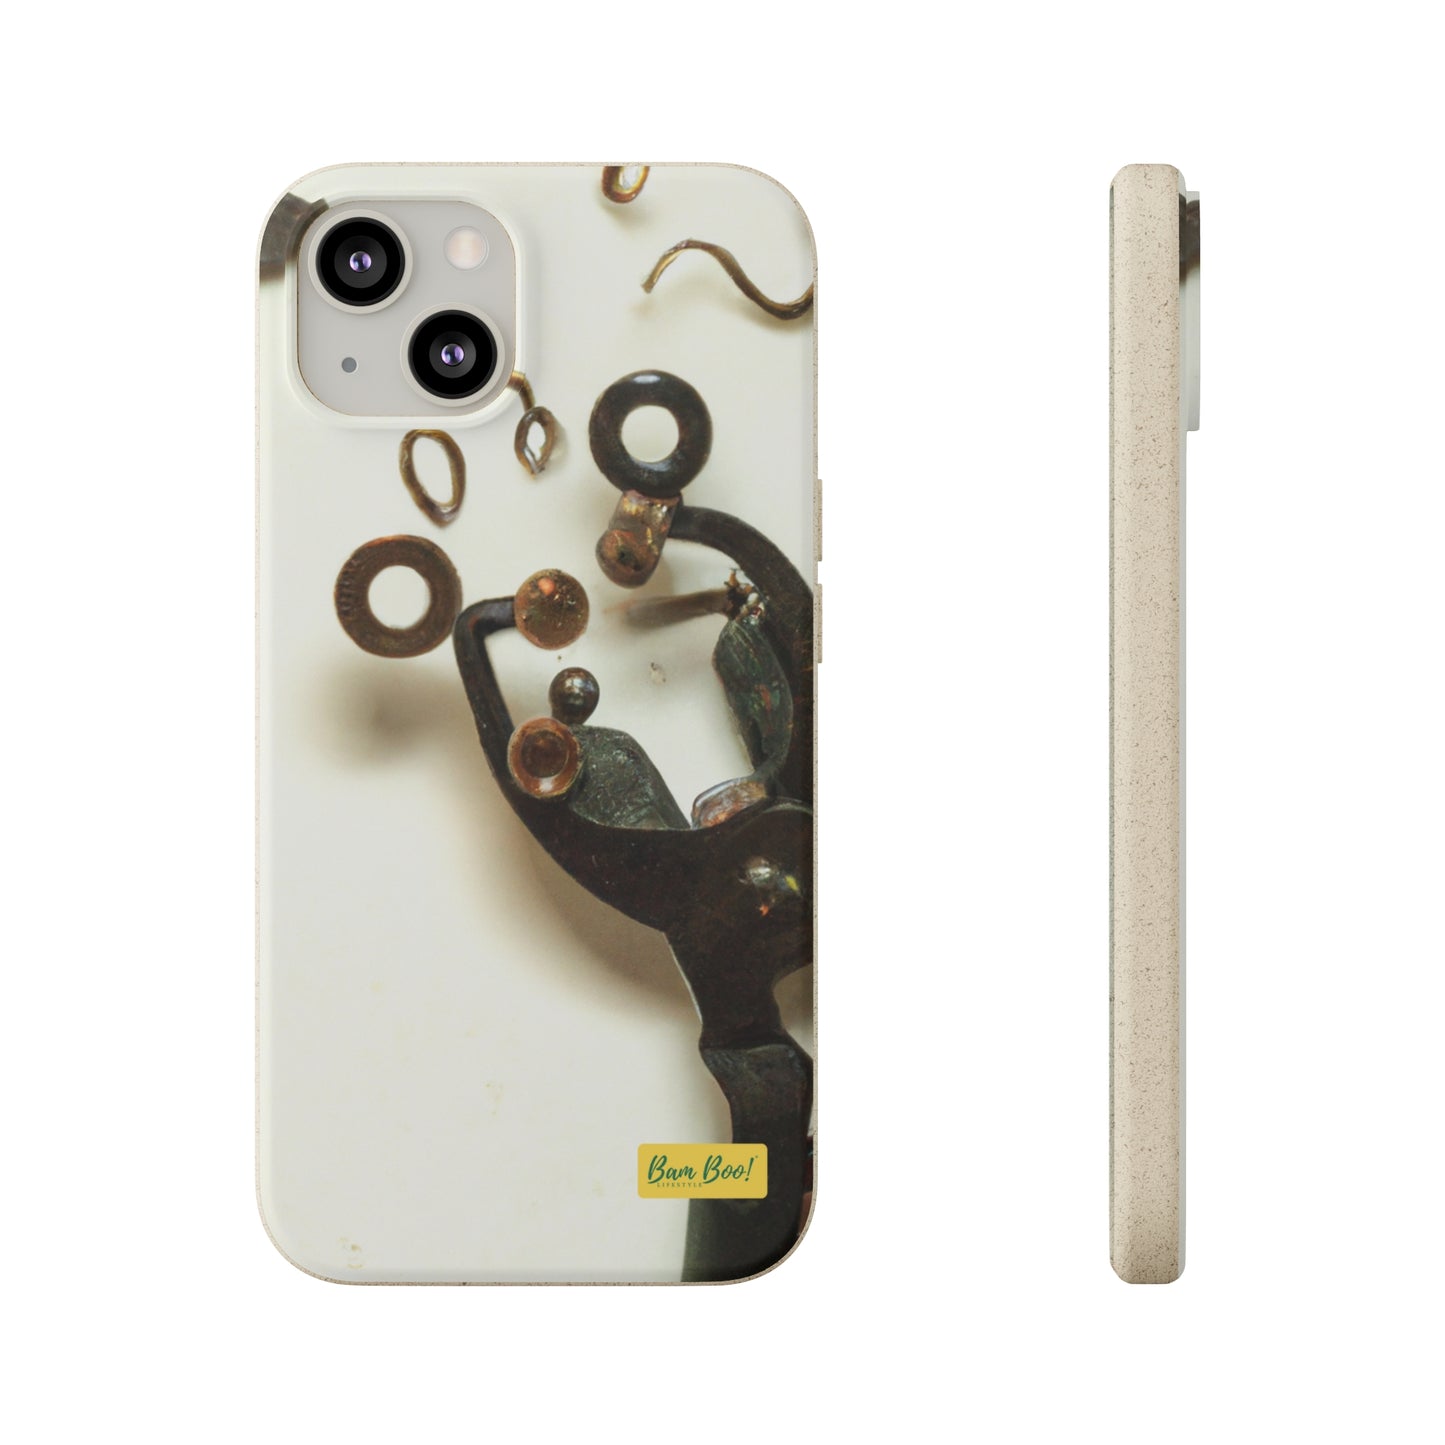 "Upcycling Artistry: An Exploration of Creative Reuse" - Bam Boo! Lifestyle Eco-friendly Cases